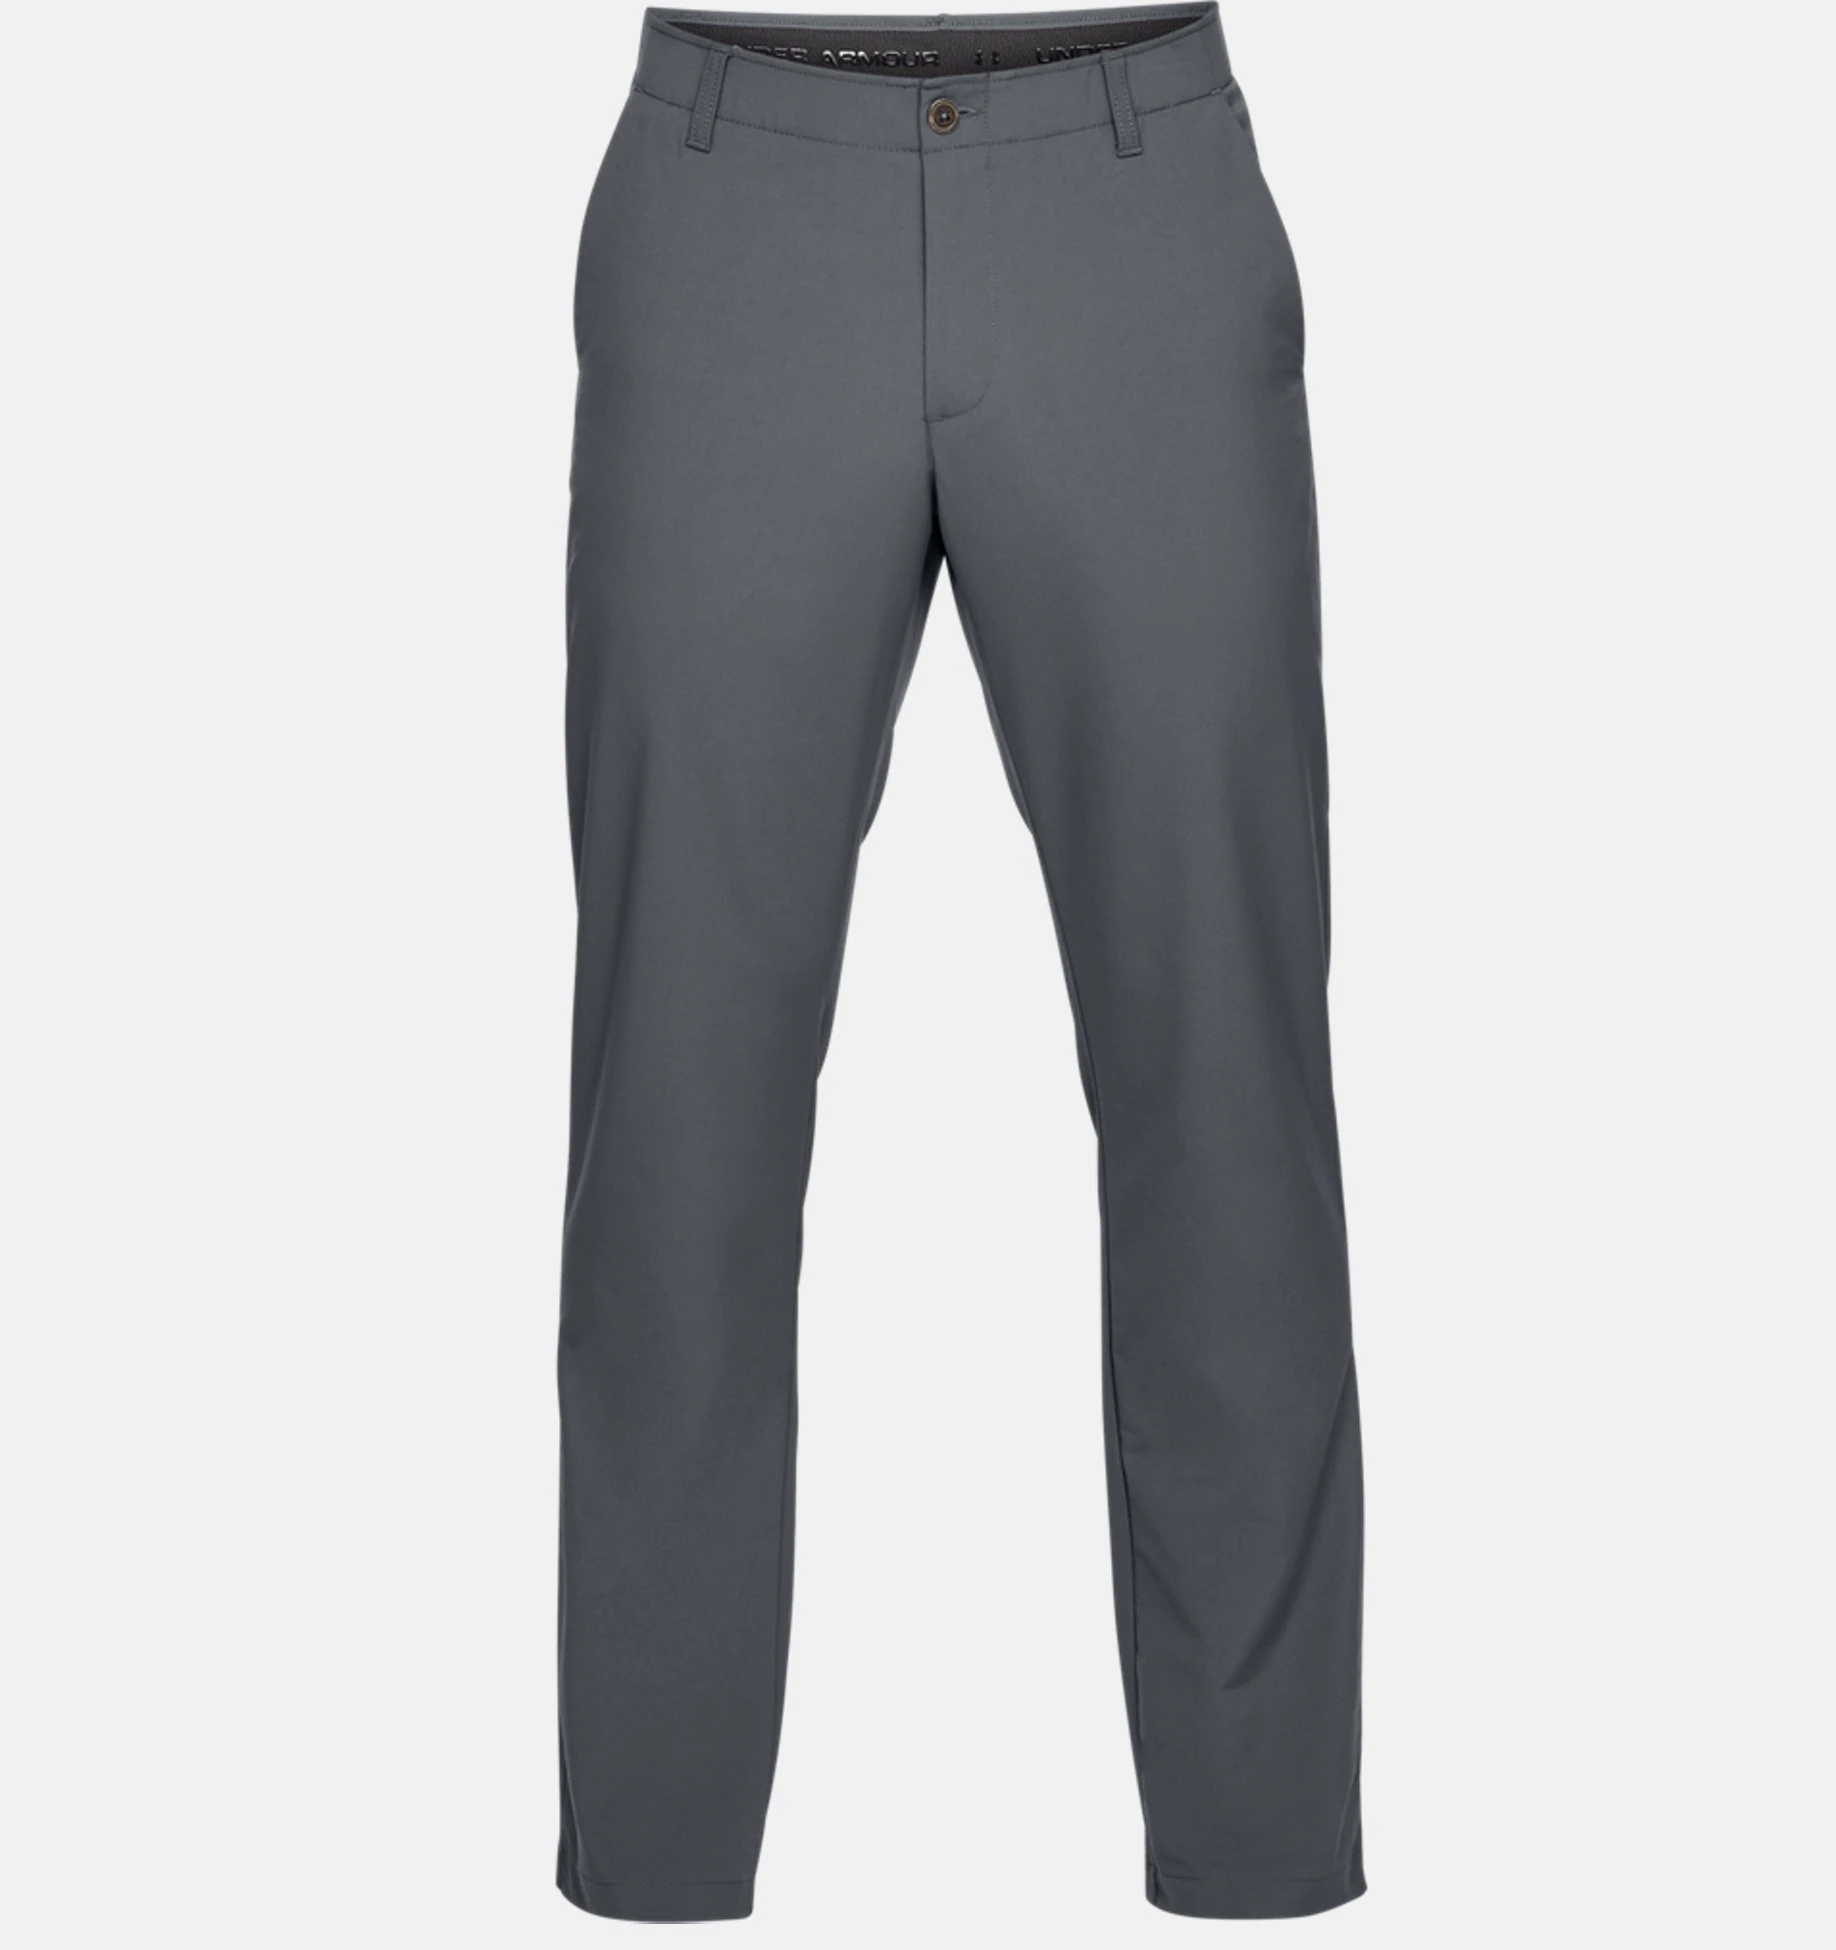 Under Armour EU Performance Taped Trouser in Grey #1331186 category image